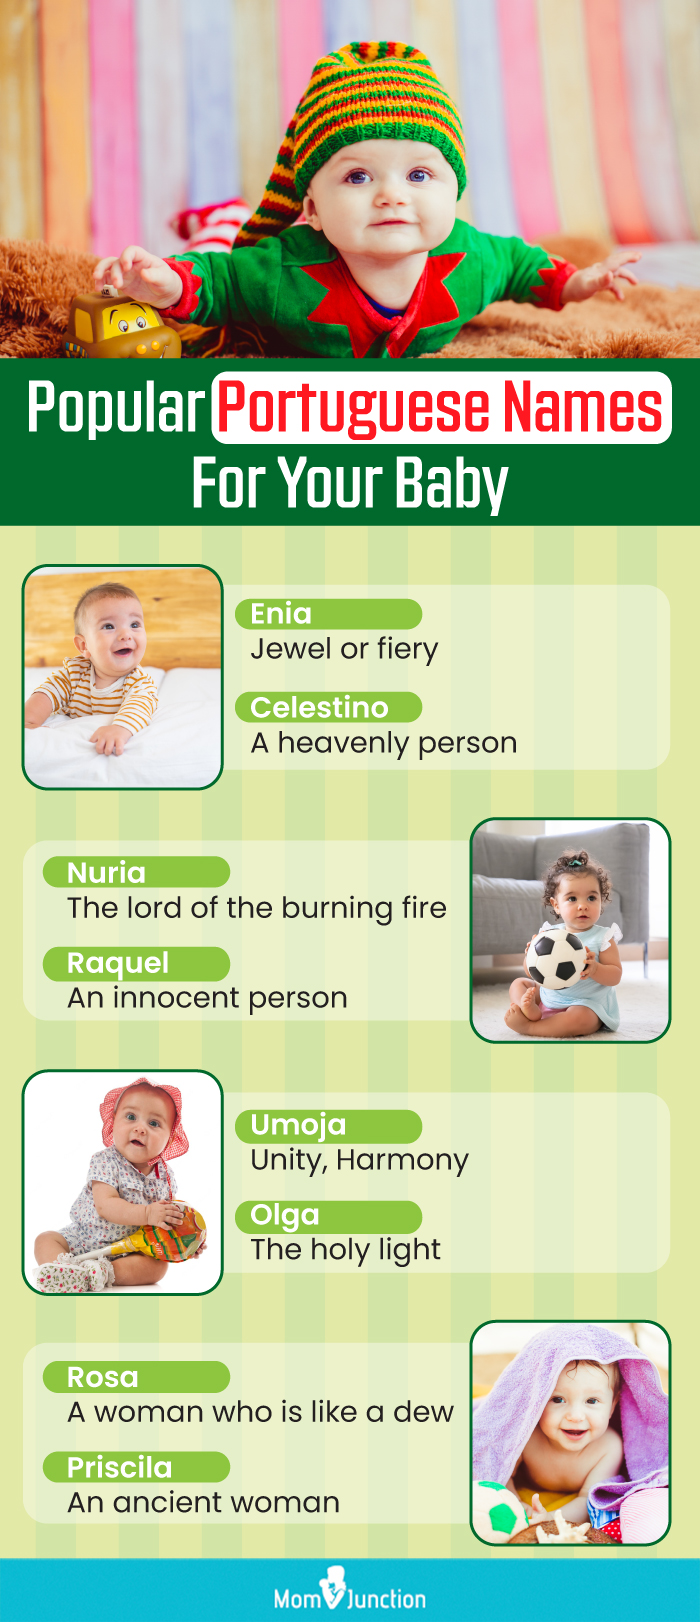 popular portuguese names for your baby (infographic)